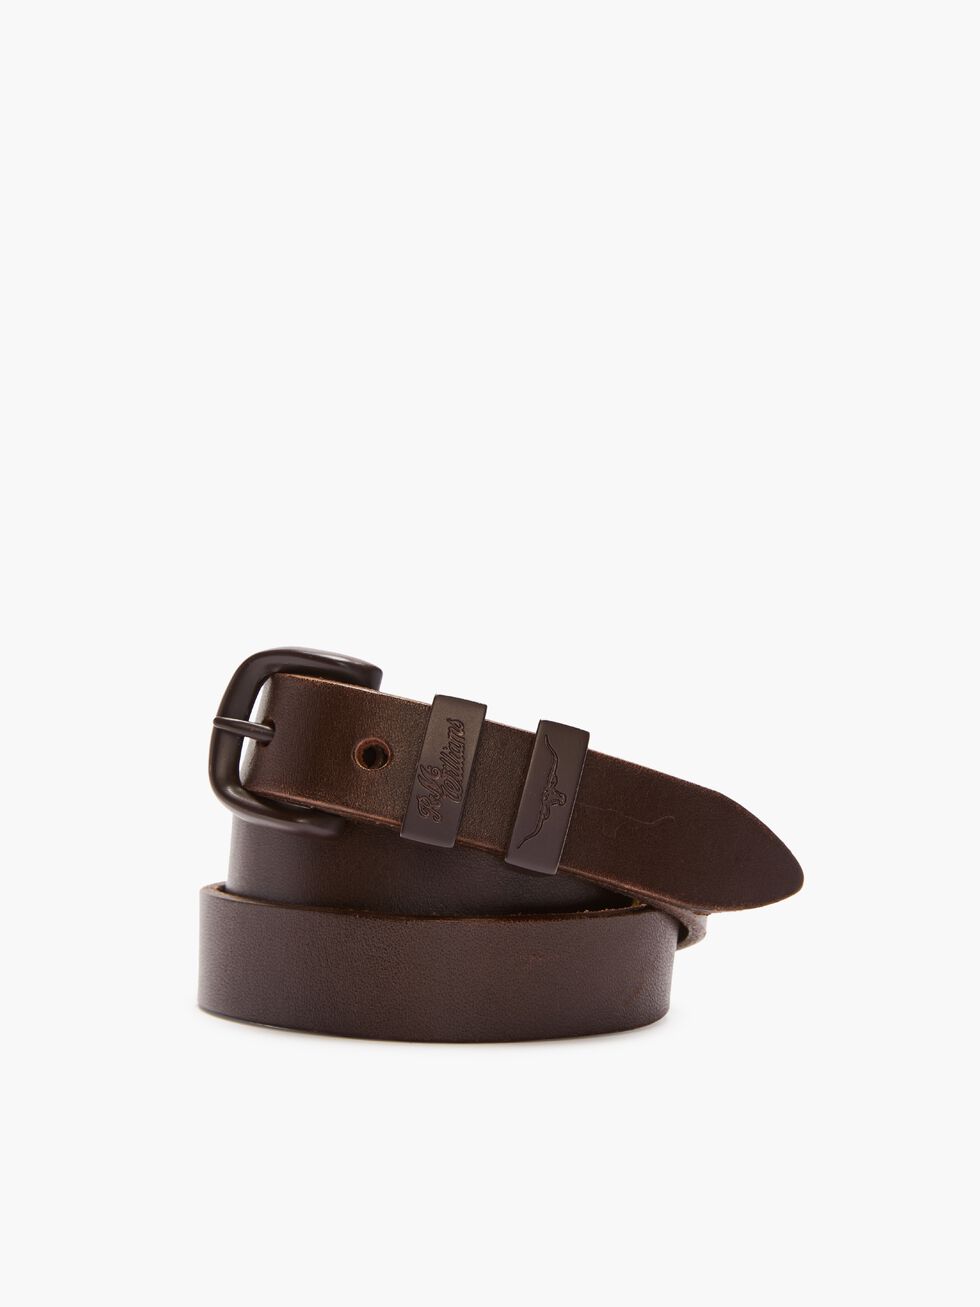 Drover Belt - Chocolate - Ruffords Country Store